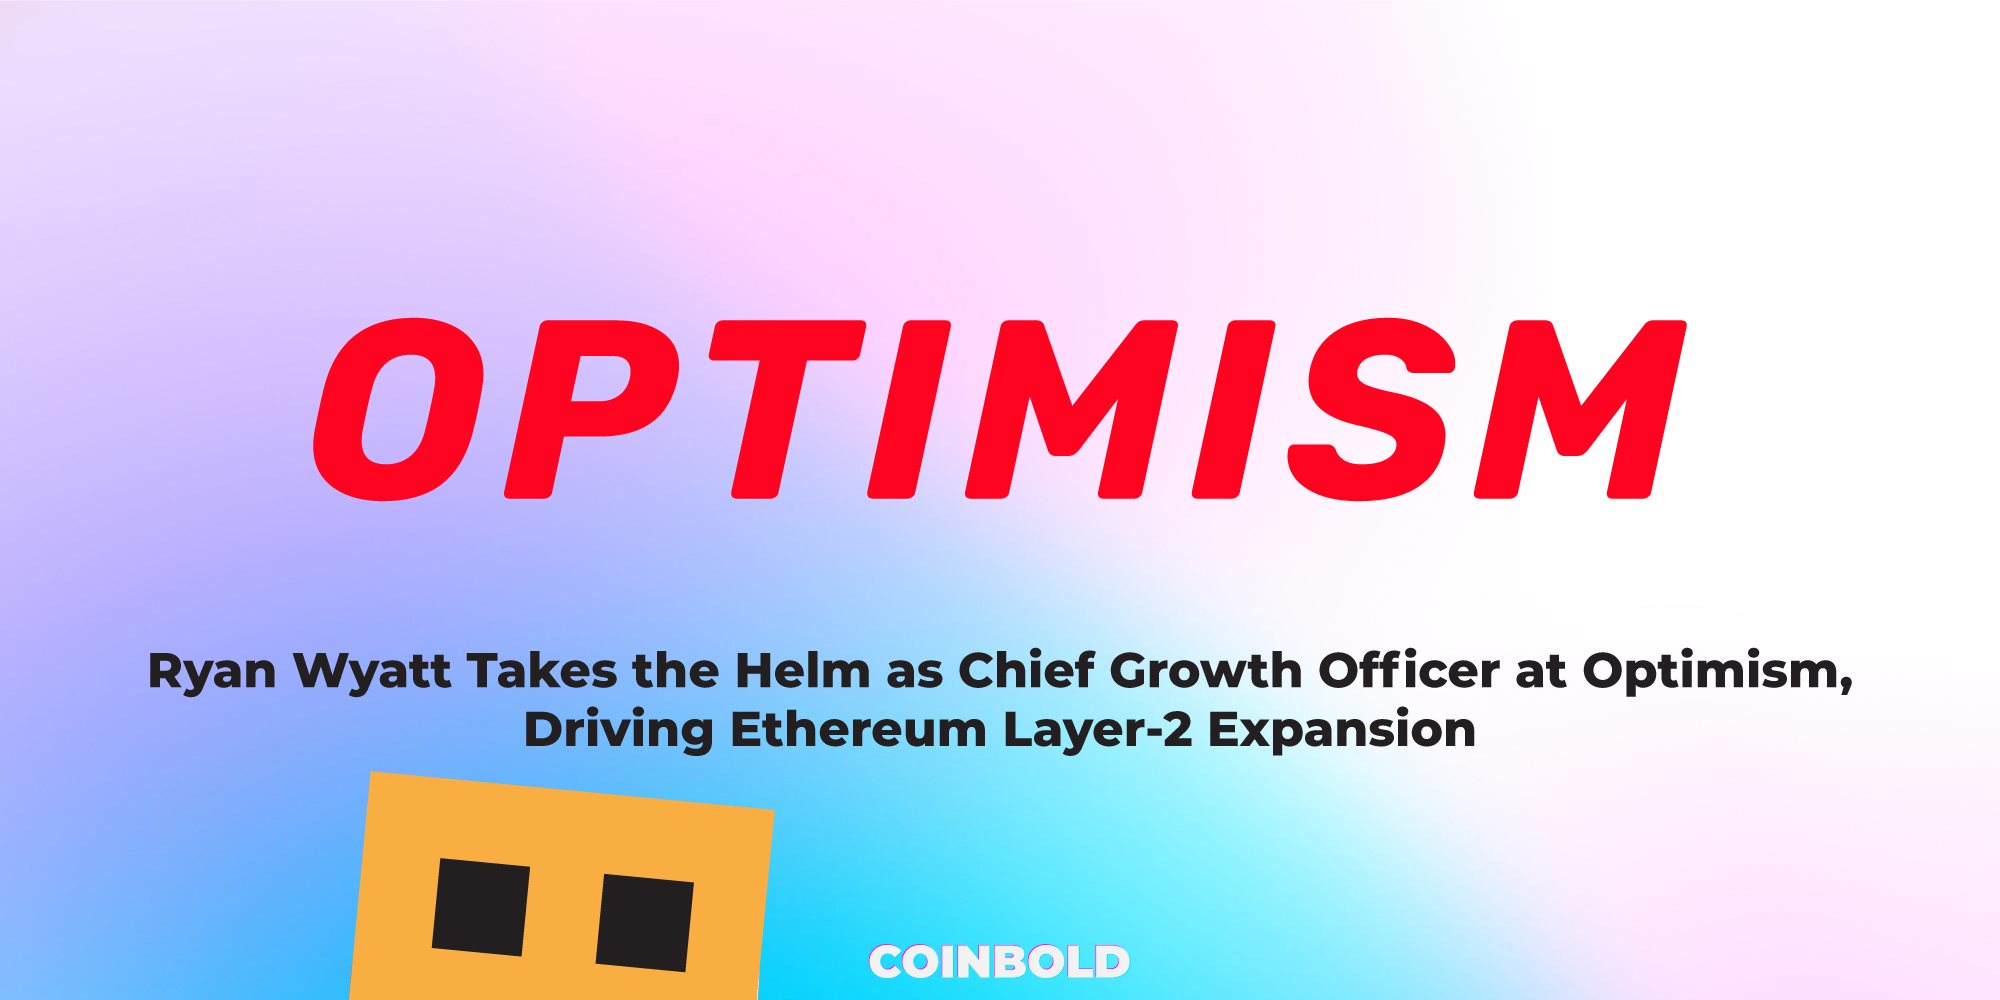 Ryan Wyatt Takes the Helm as Chief Growth Officer at Optimism, Driving Ethereum Layer-2 Expansion